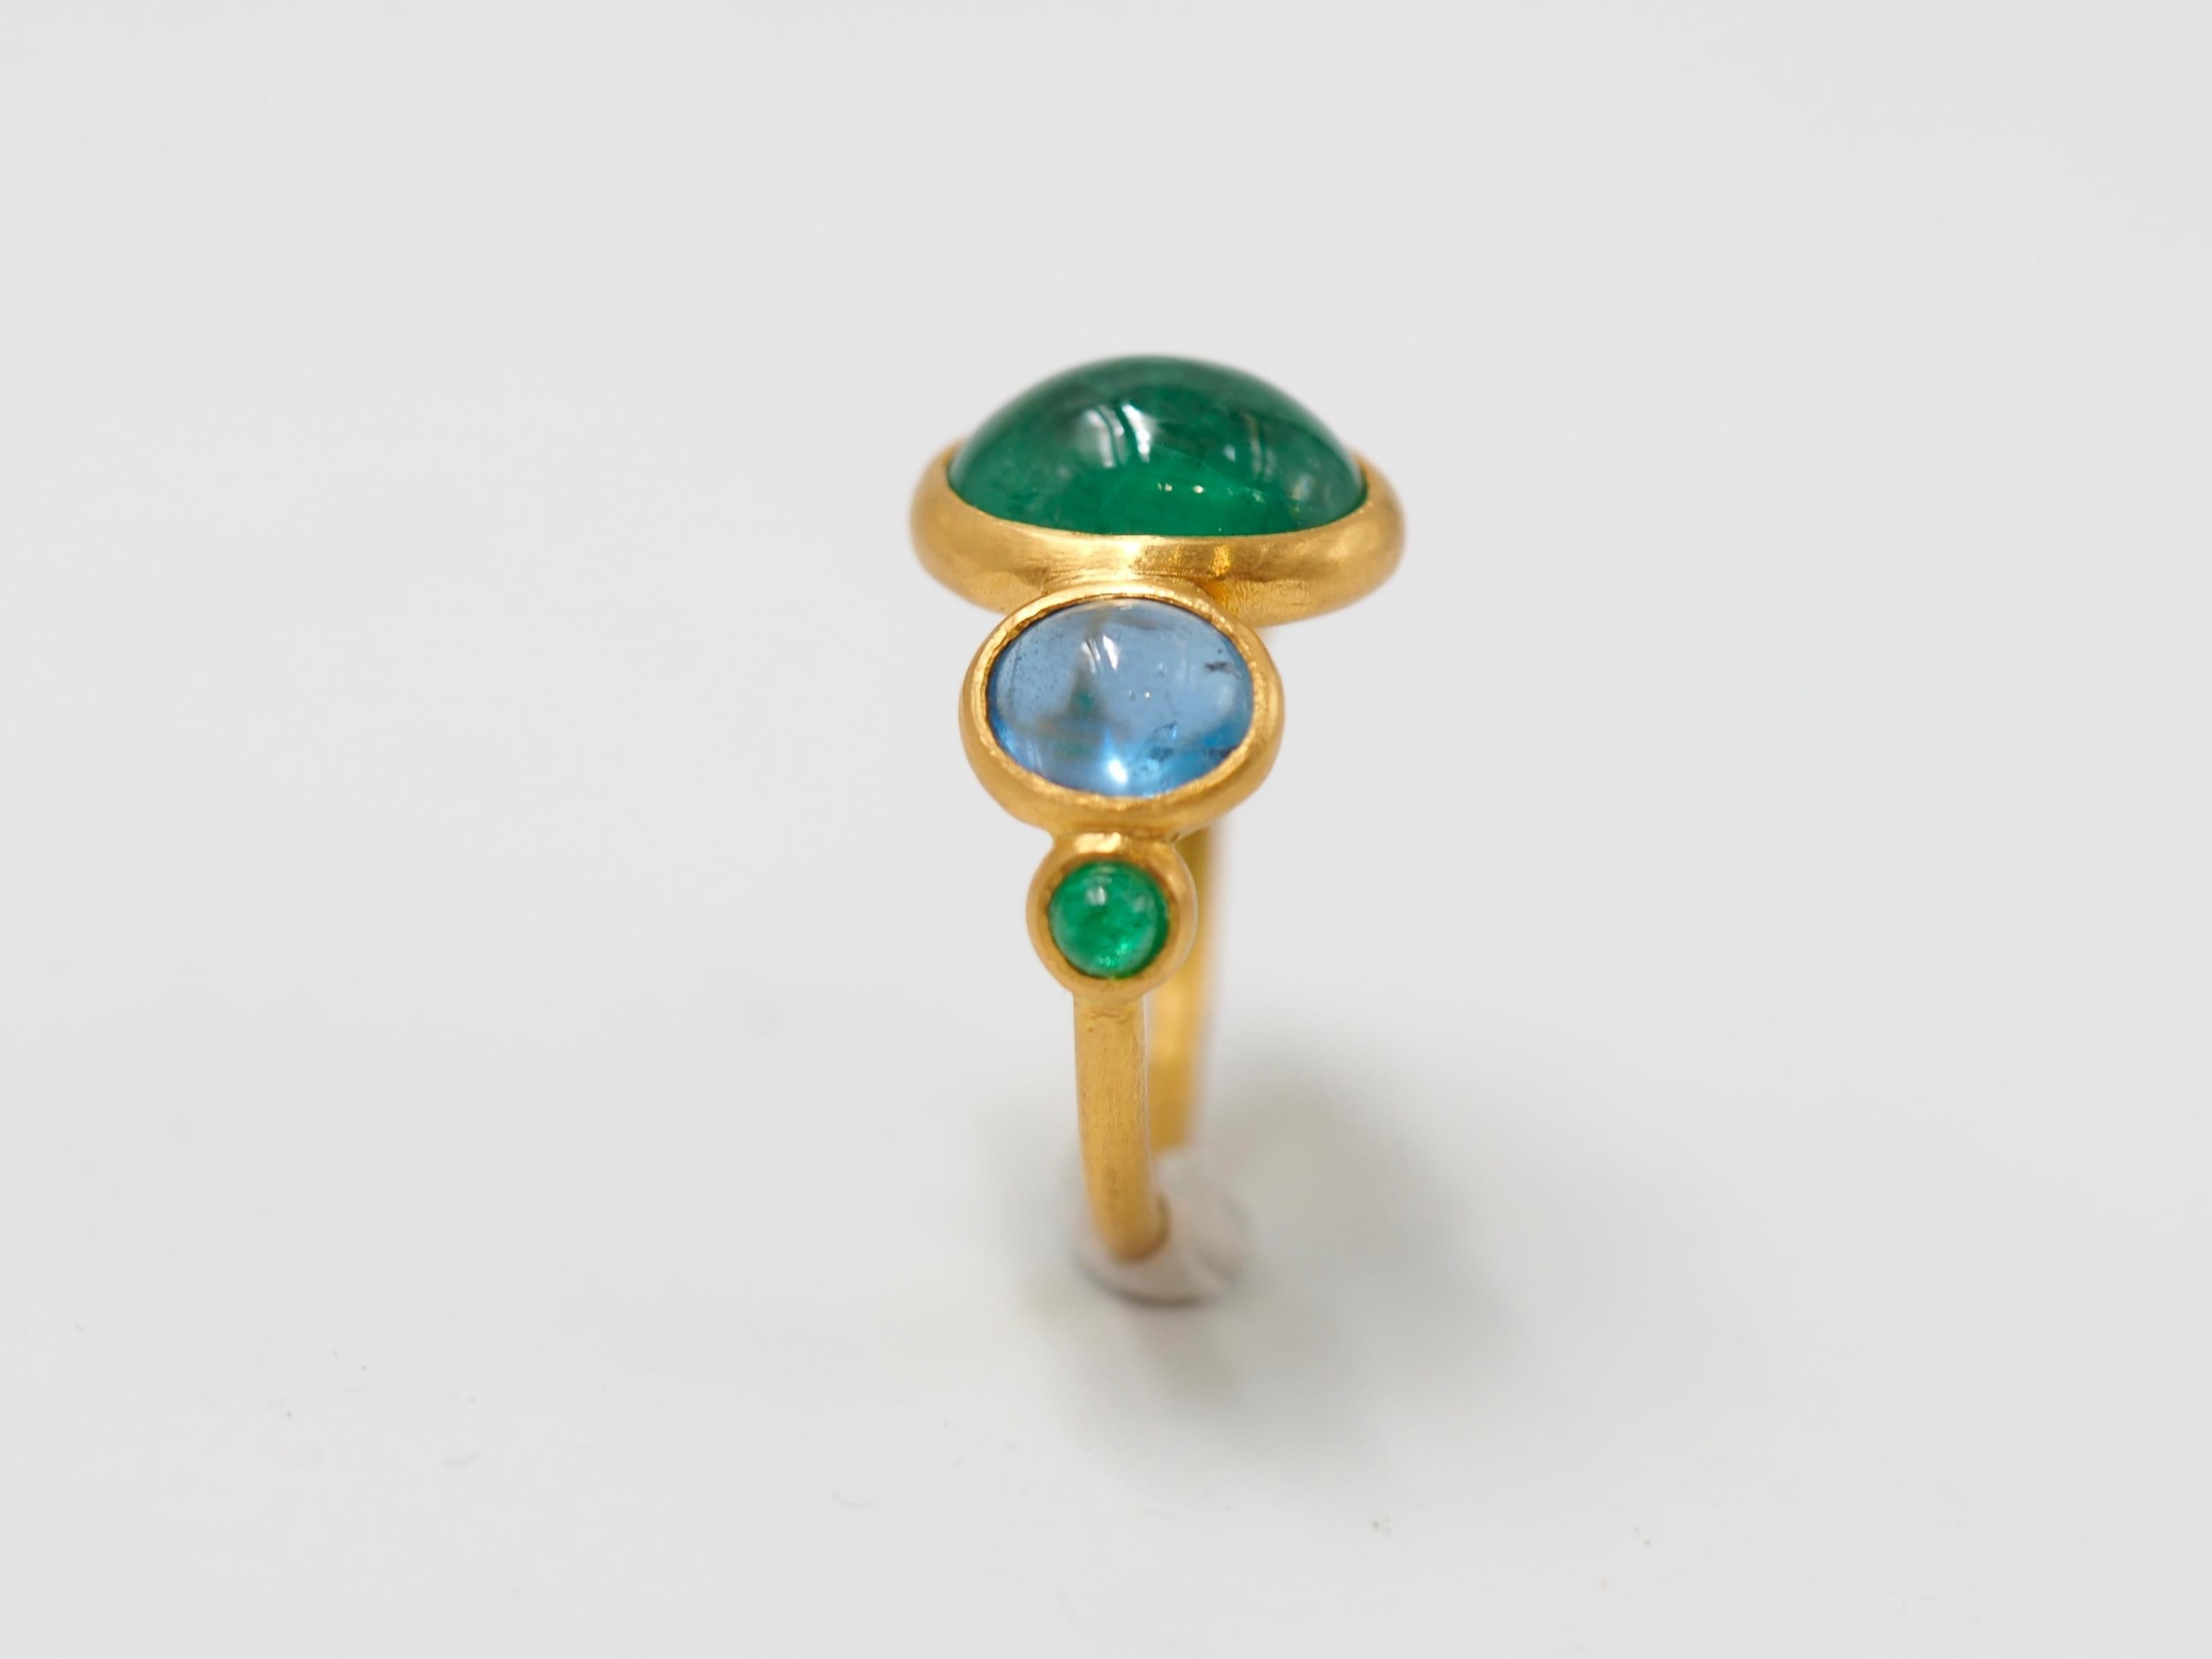 This delicate ring is composed of 5 stones in line: 3 natural emerald cabochons and 2 deep blue natural aquamarine cabochons. The center stone is an emerald of 3.79 cts and the 2 smaller emeralds have a total weight of 0.27cts. The 2 aquamarines